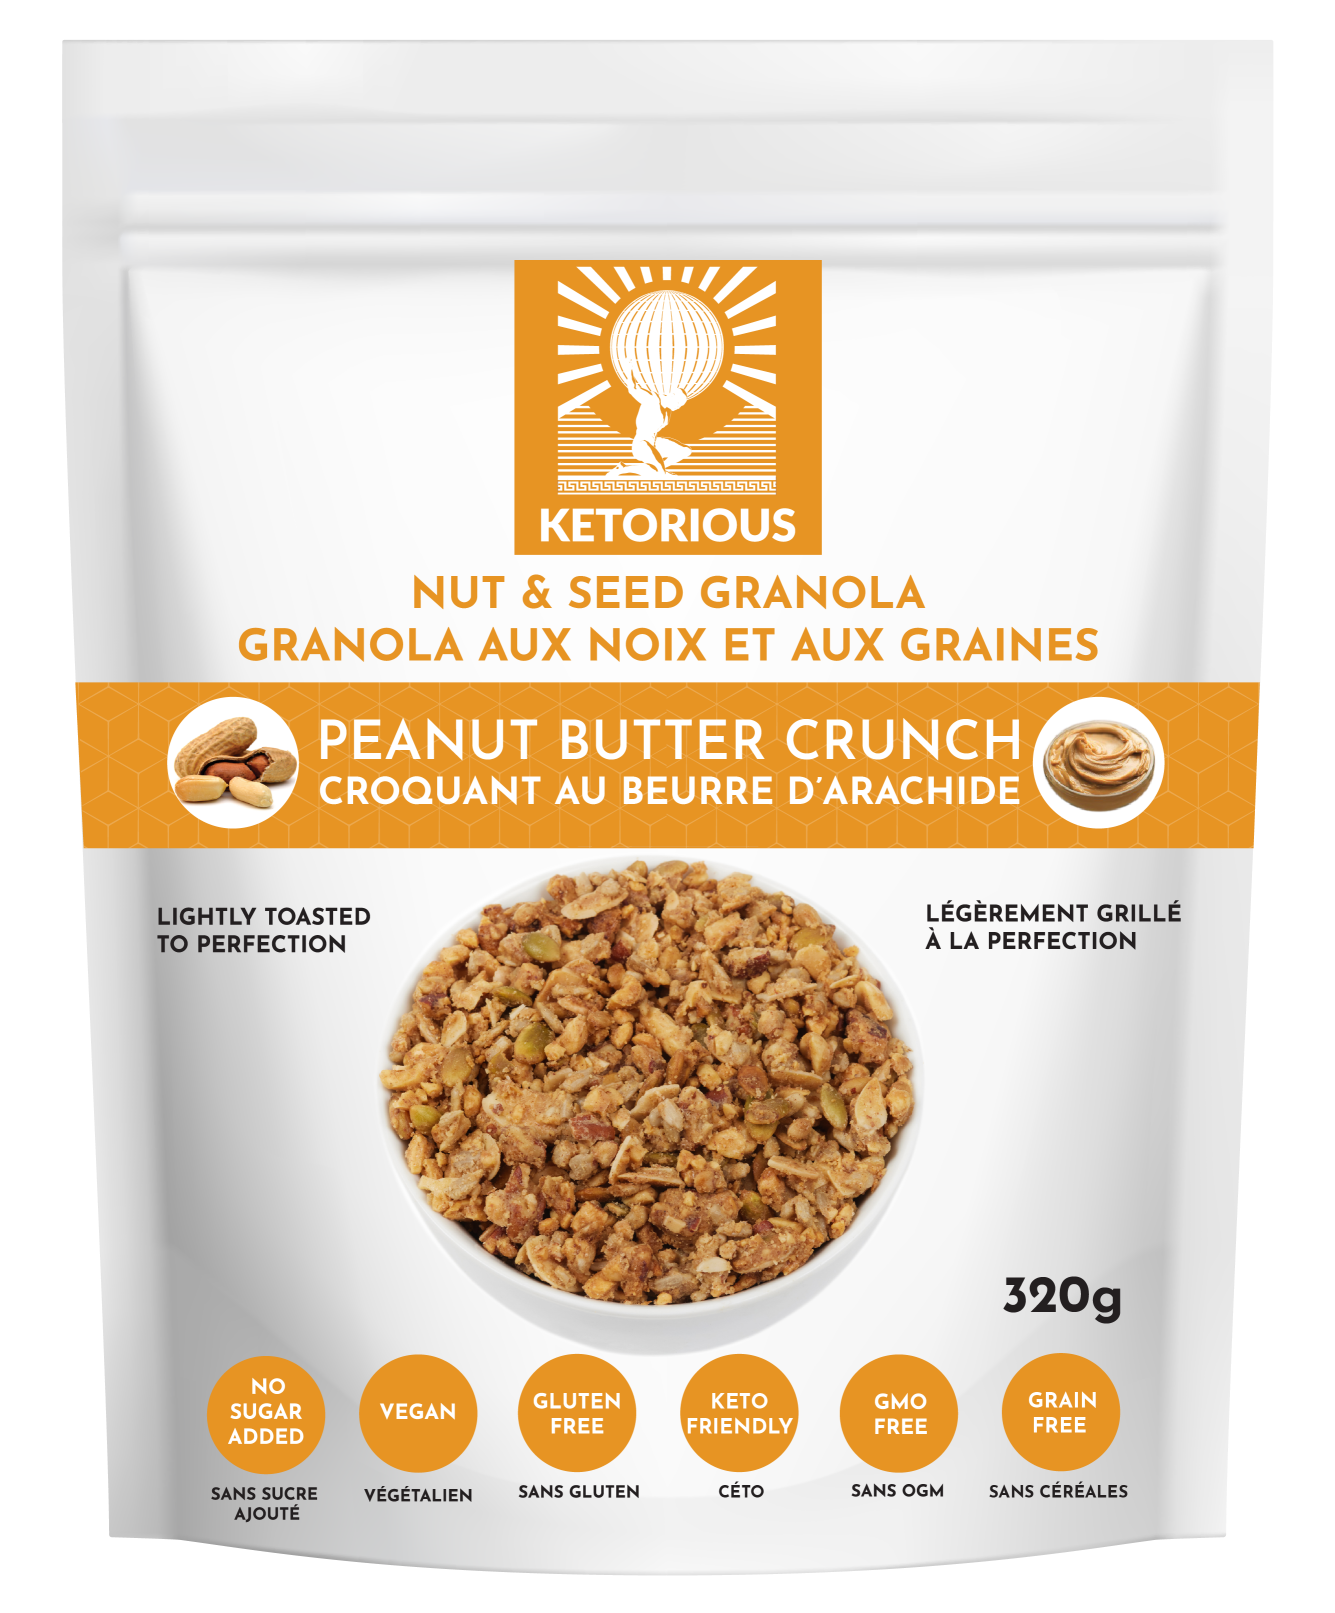 Peanut Butter Crunch Nut and Seed Granola by Ketorious, 320g (Copy)